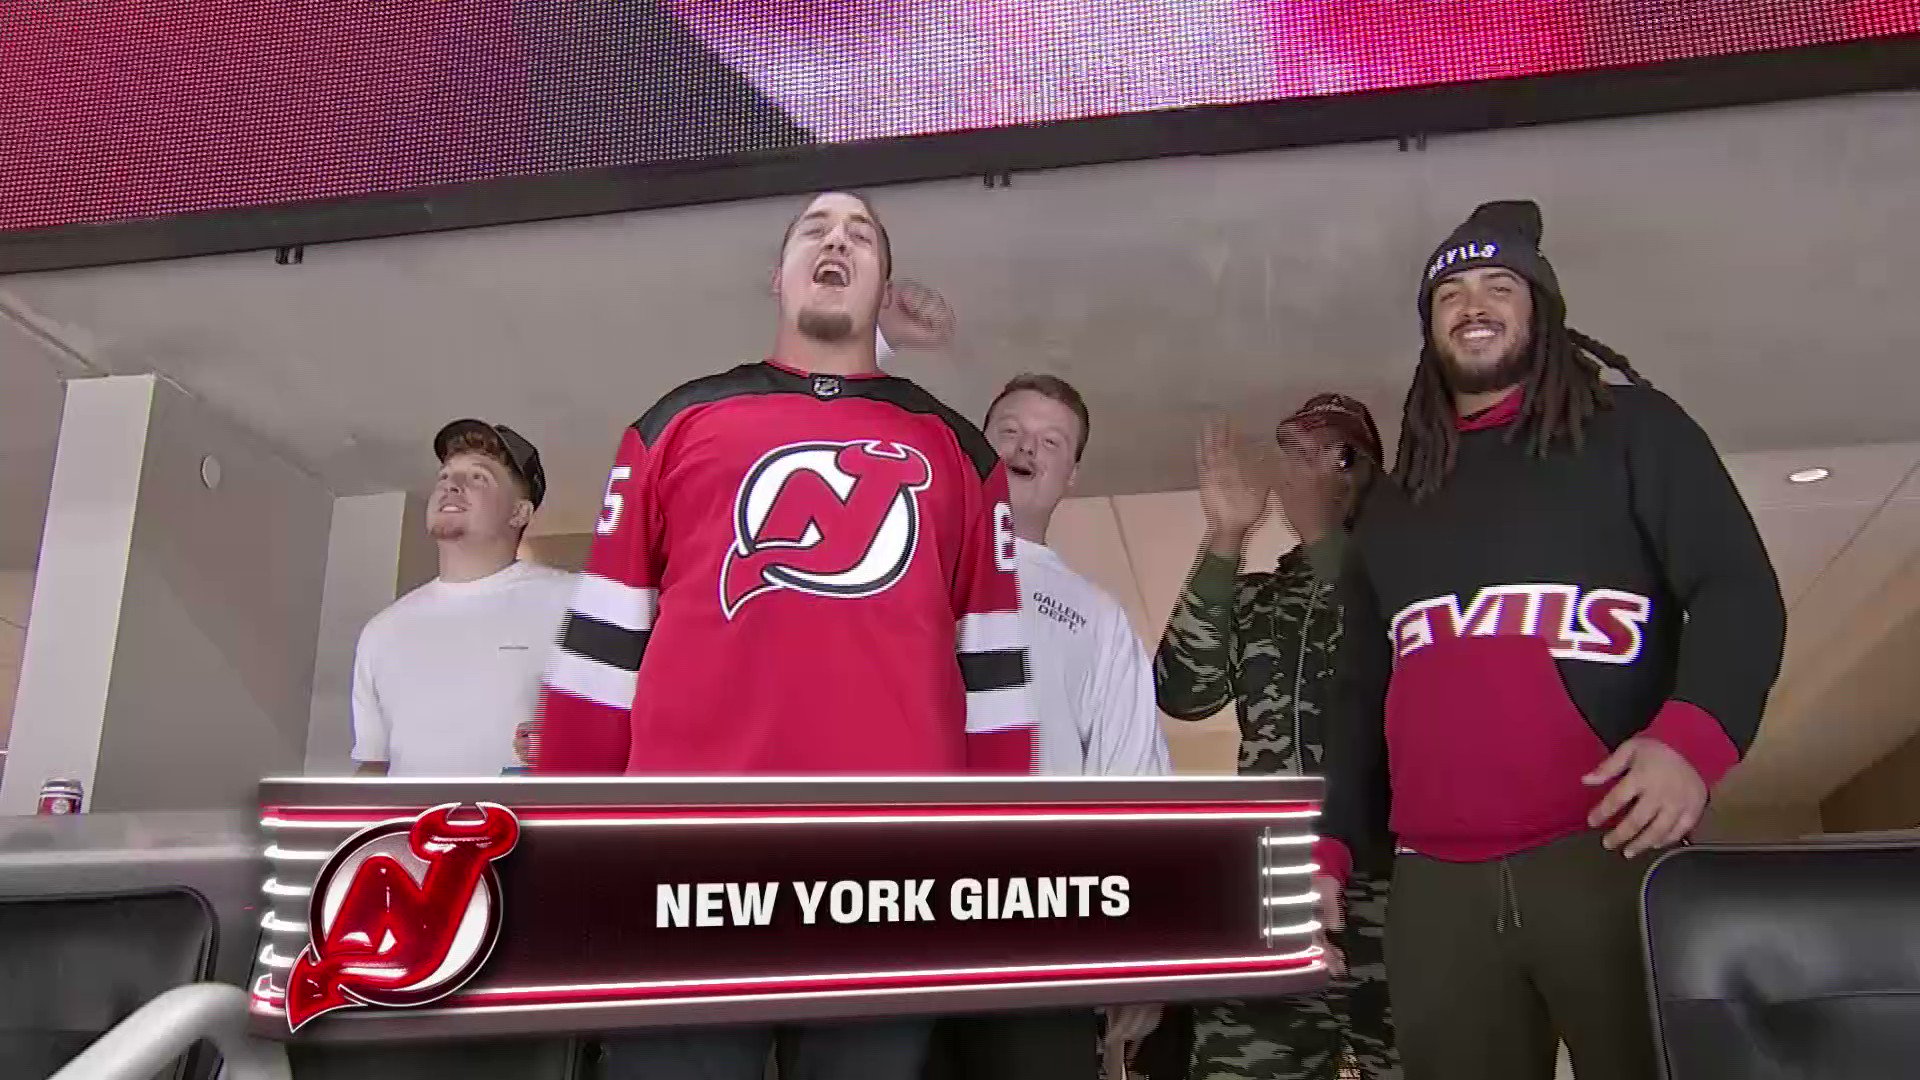 Our 6-1 New York Giants in the house at the Devils game tonight, Chuggin  beers and gettin weird. : r/NYGiants